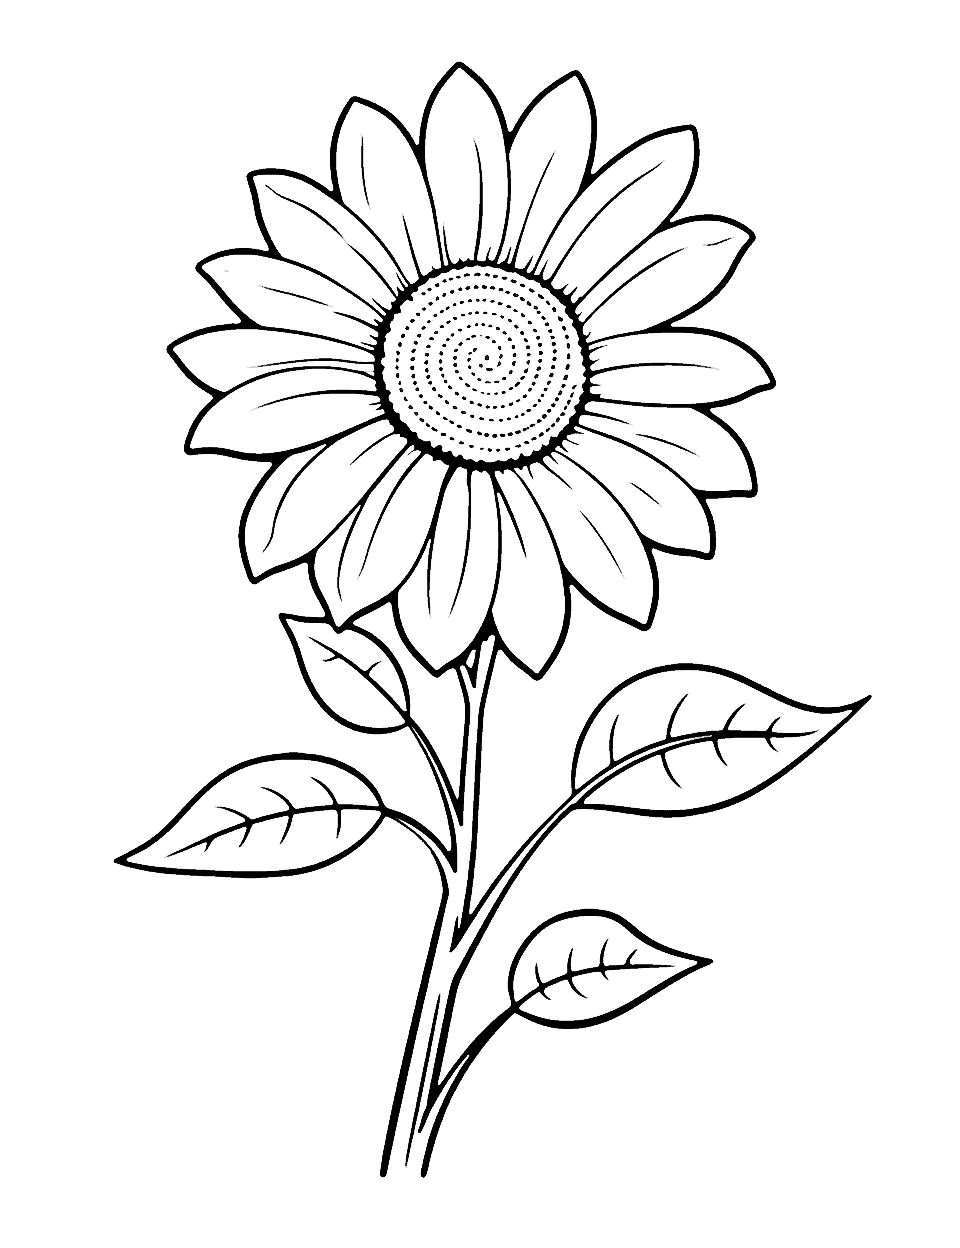 Large and Simple Sunflower Flower Coloring Page - A sunflower design that’s large and simple for young kids to color.